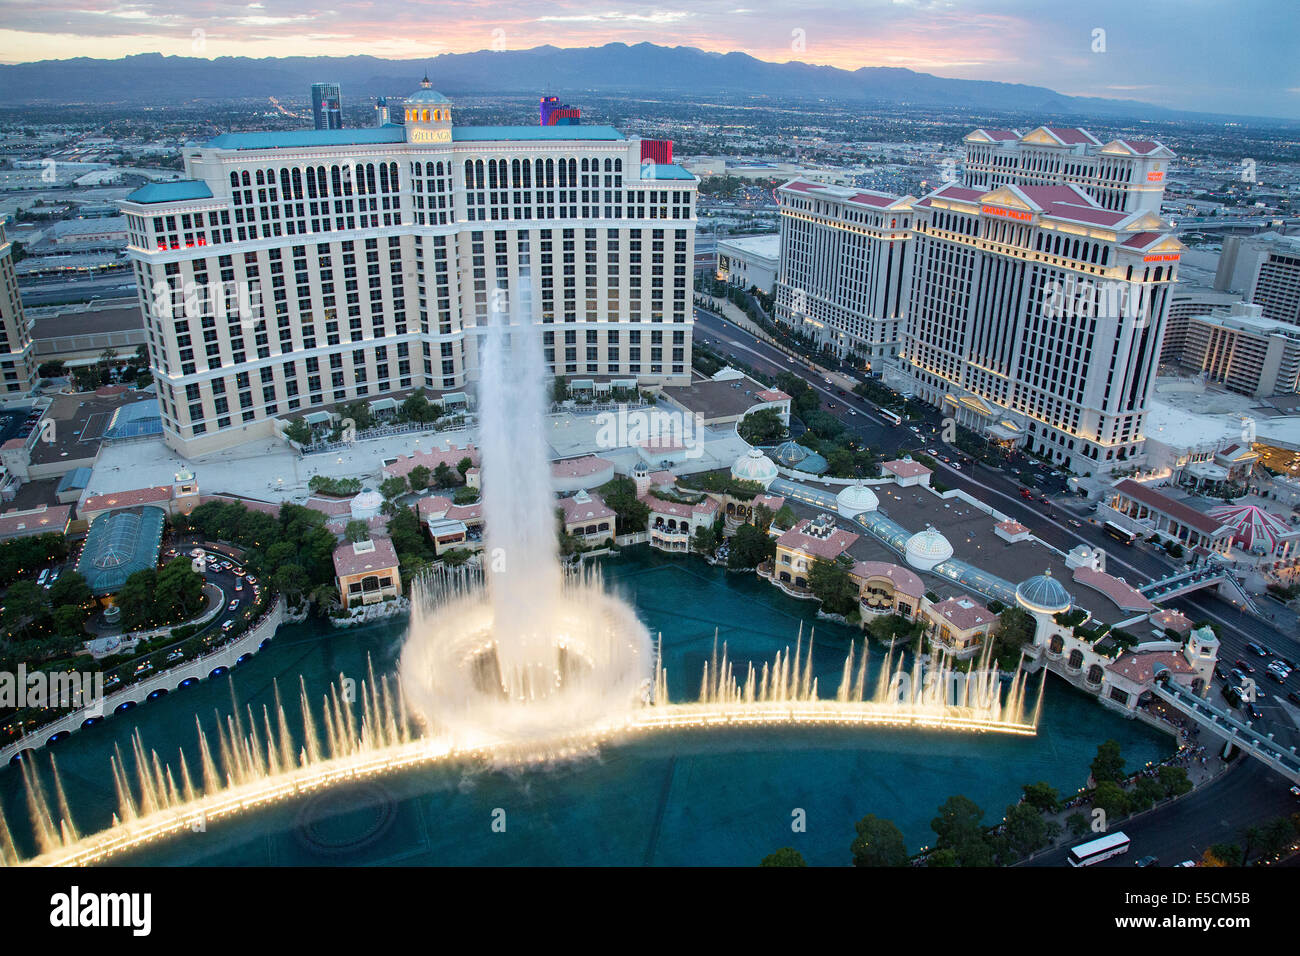 The Bellagio luxury hotel, casino, and fountains on the Las Vegas Strip in Paradise, Nevada. Stock Photo